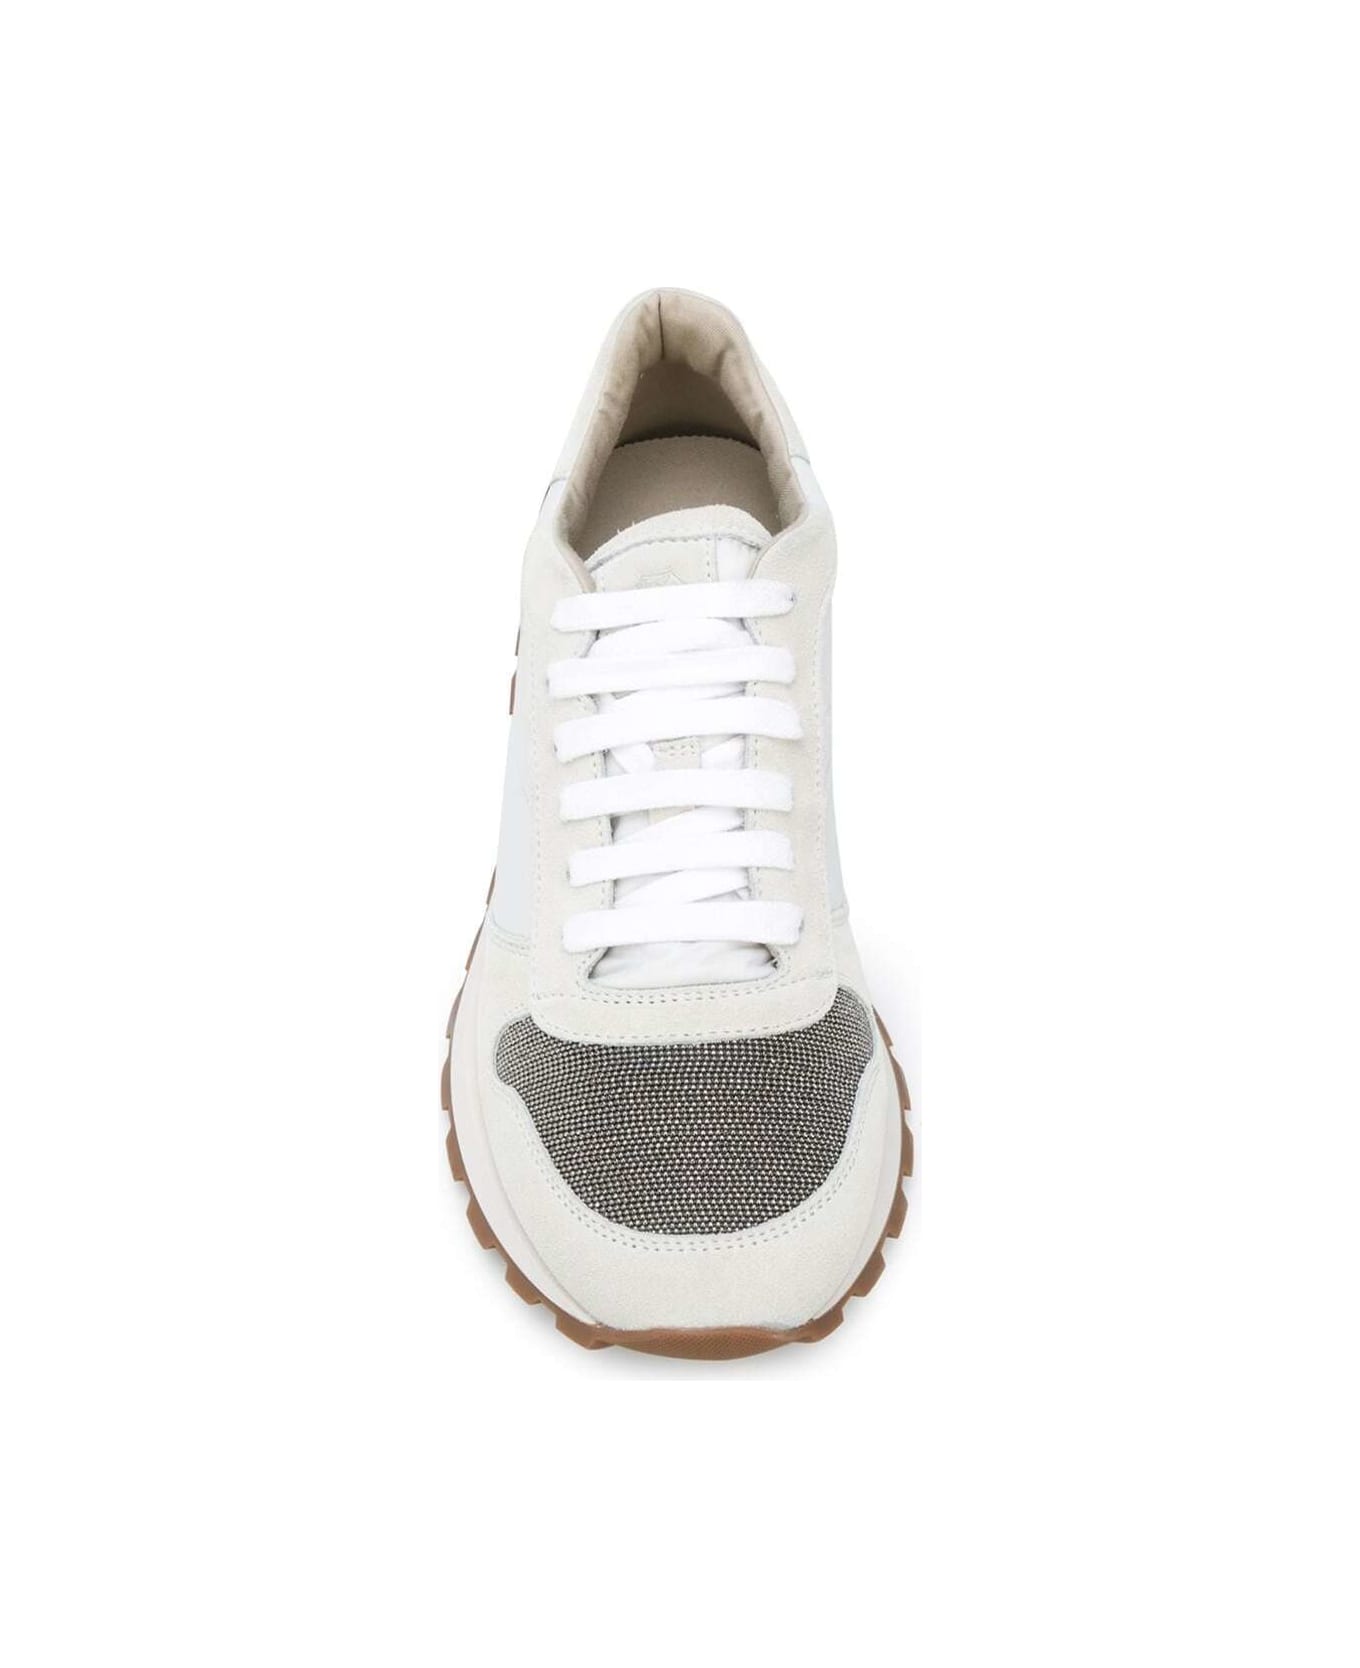 Brunello Cucinelli Woman's Leather Sneakers With Monile Detail - White